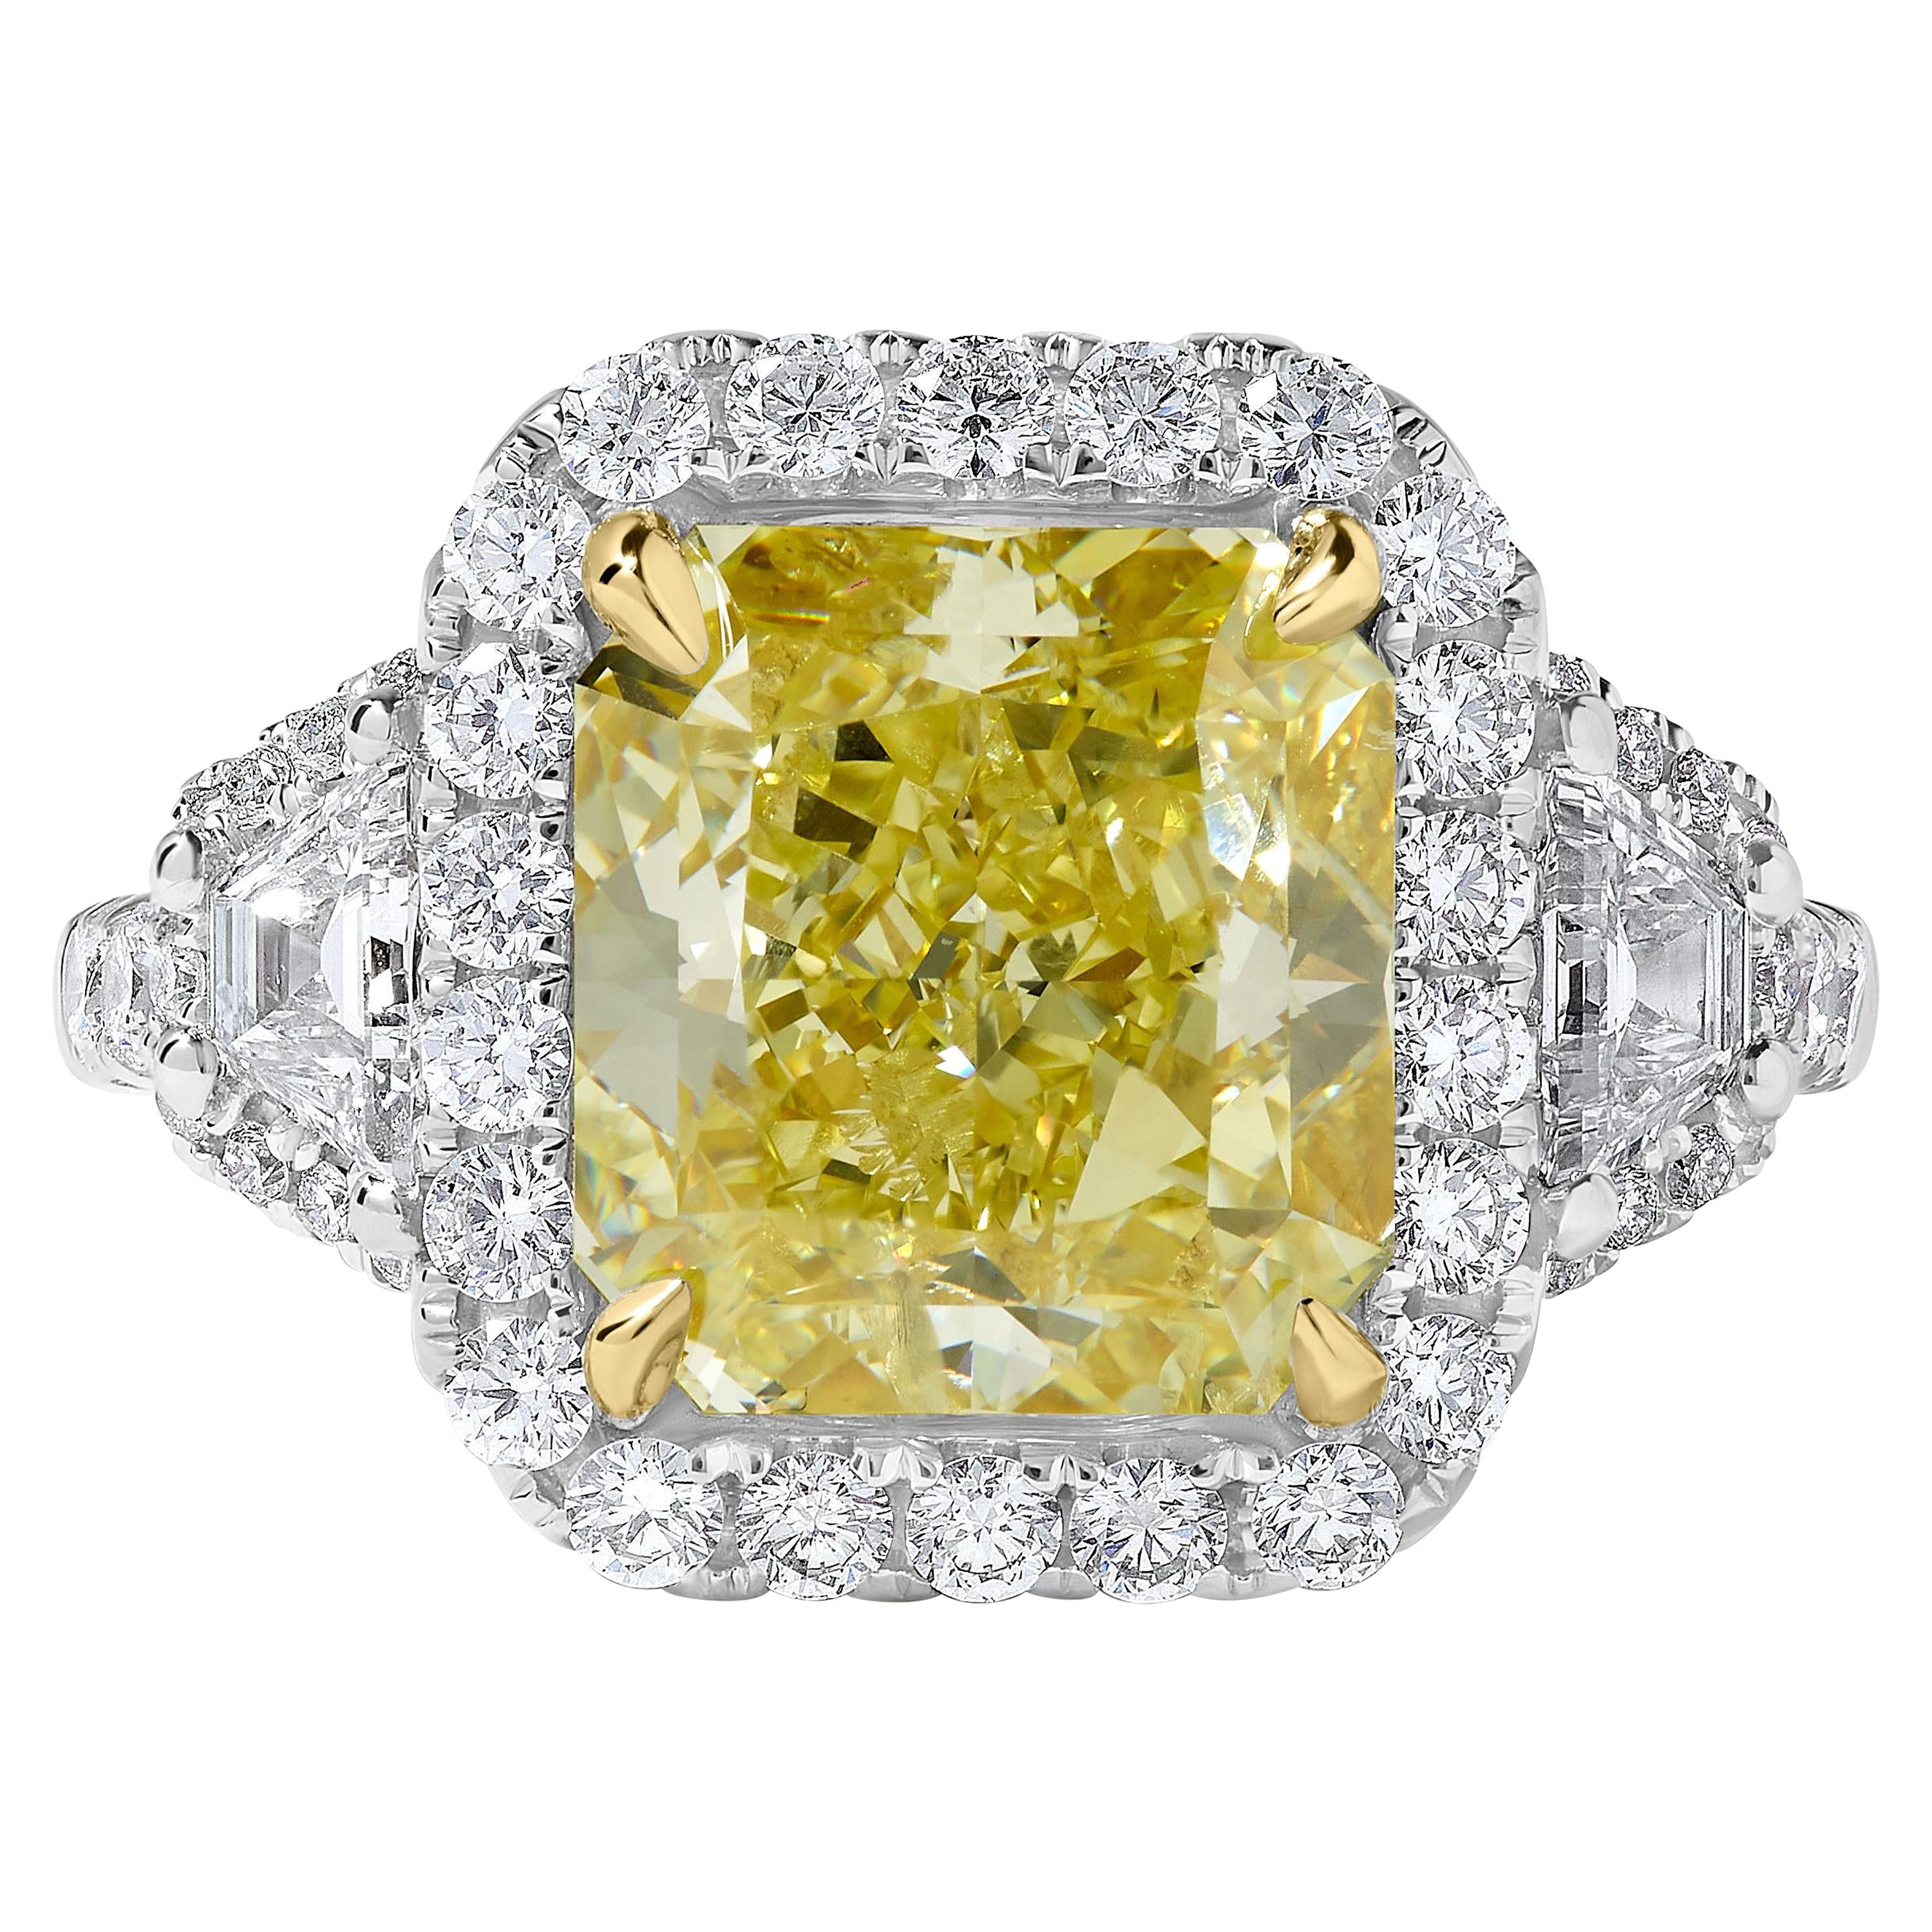 Are yellow diamonds more expensive than white ones?